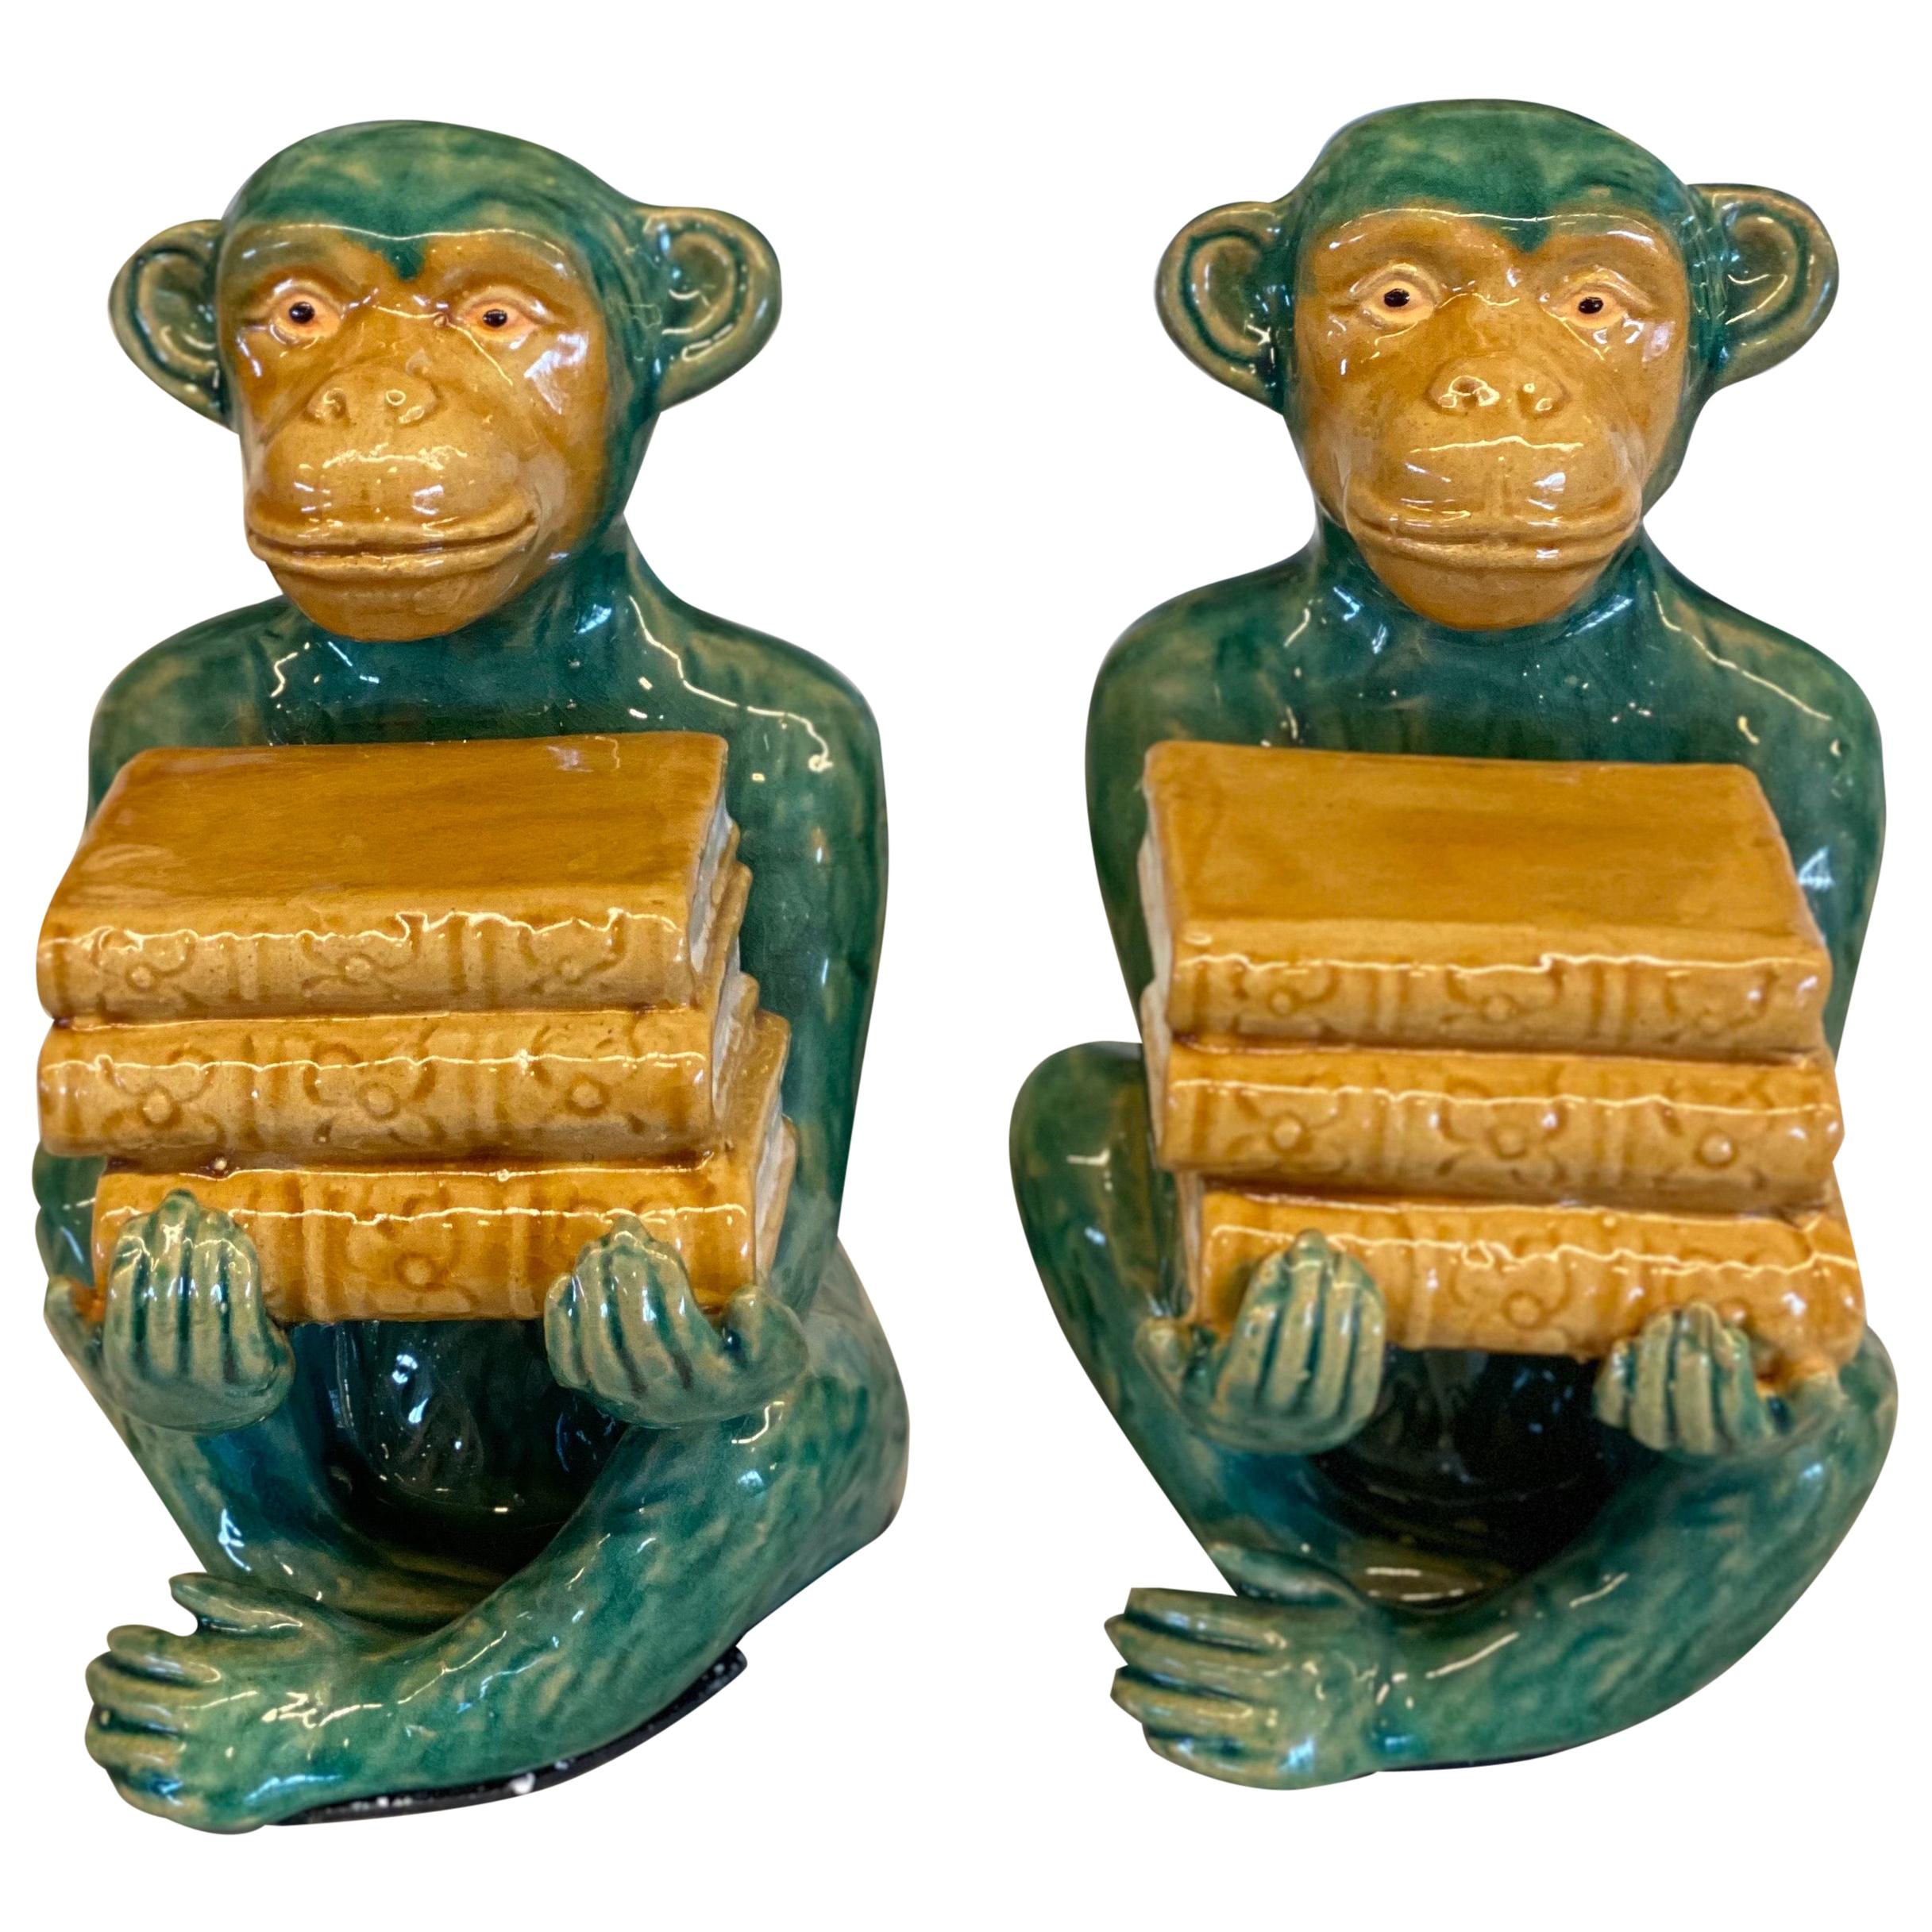 Pair of Green/Yellow Monkey Statues